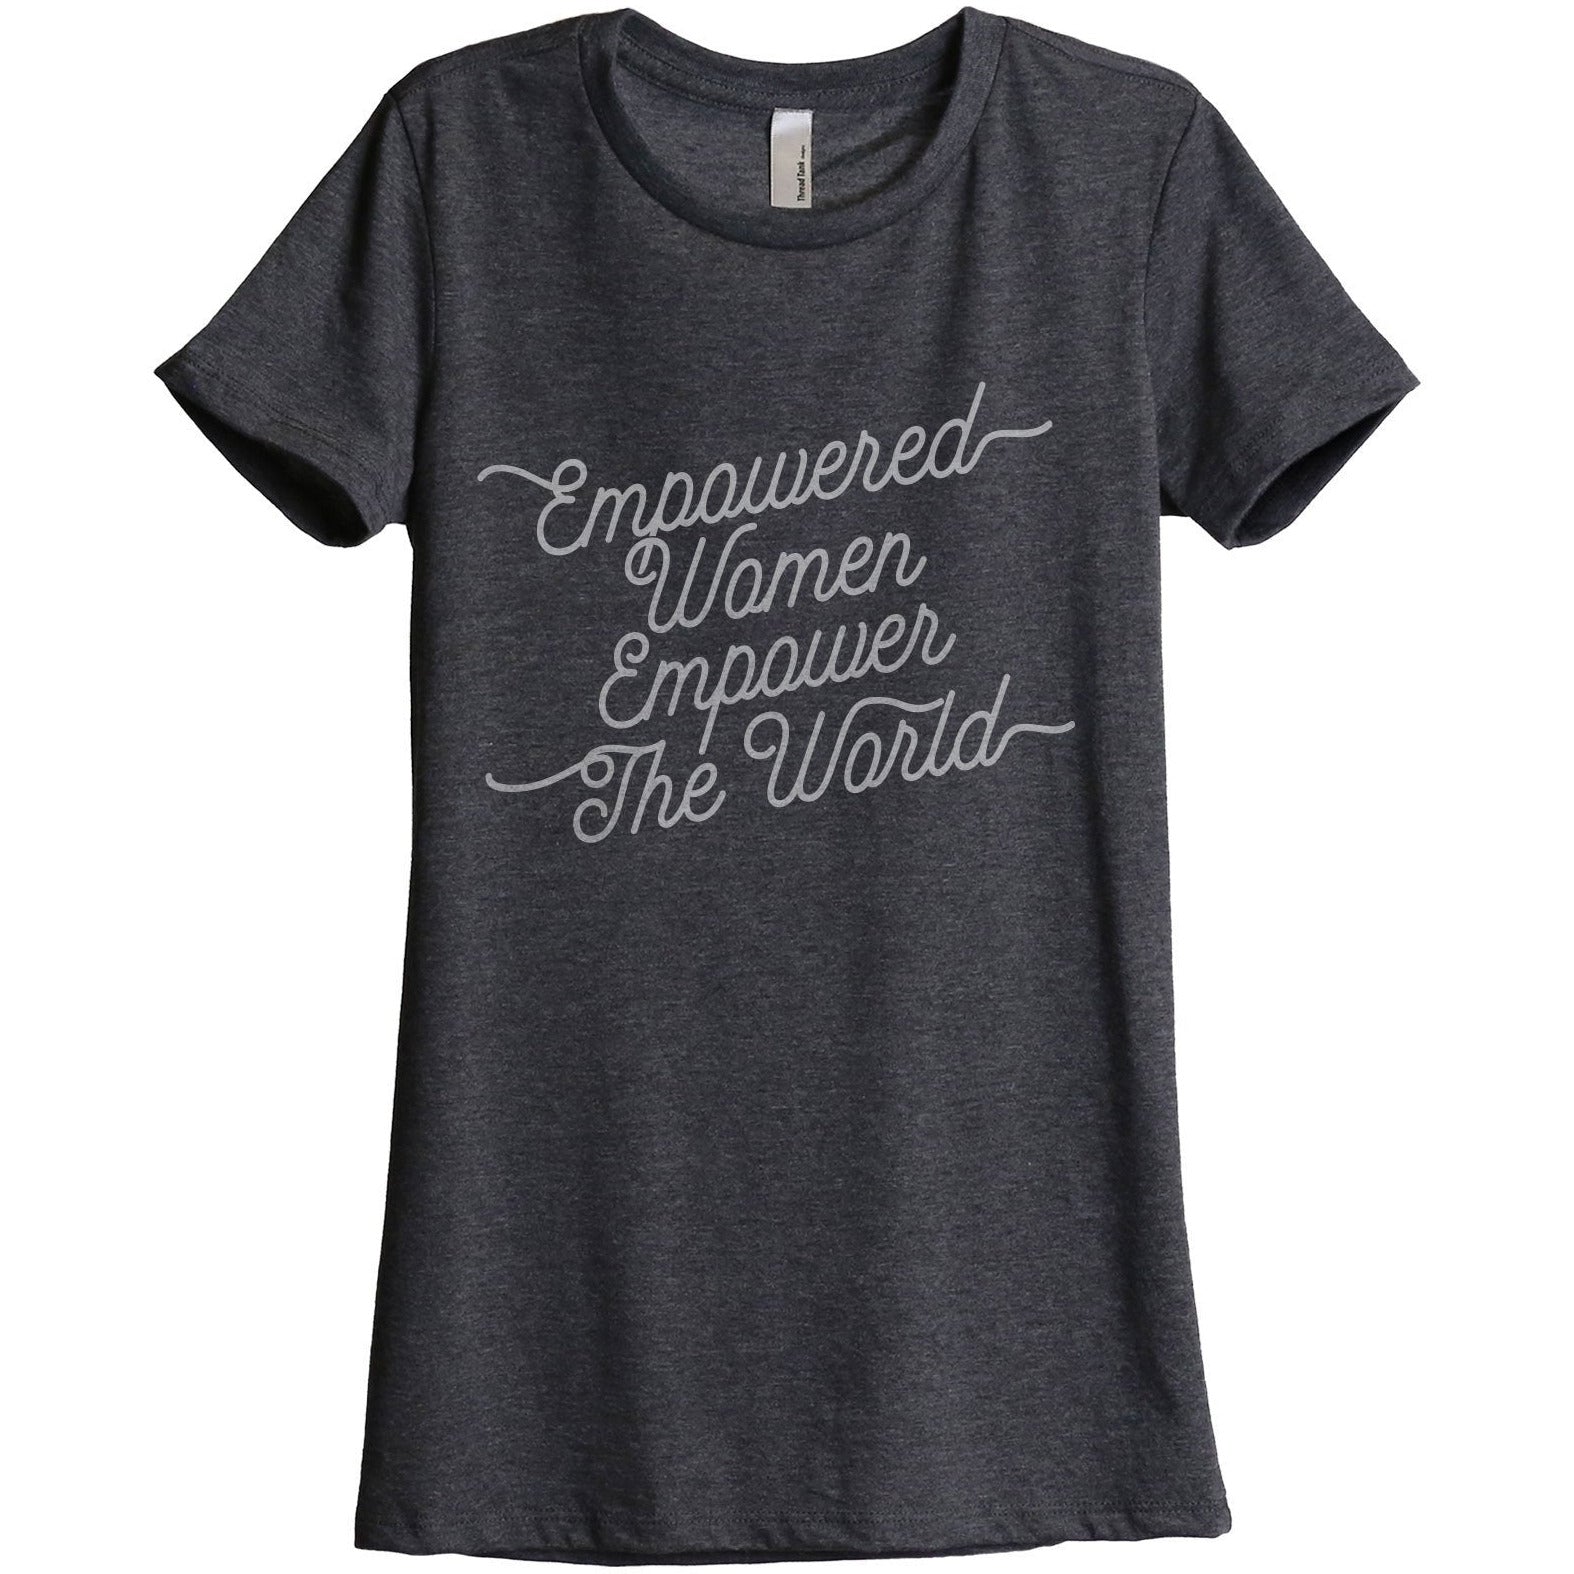 Empowered Women Empower The World Women's Relaxed Crewneck T-Shirt Top Tee Charcoal Grey
